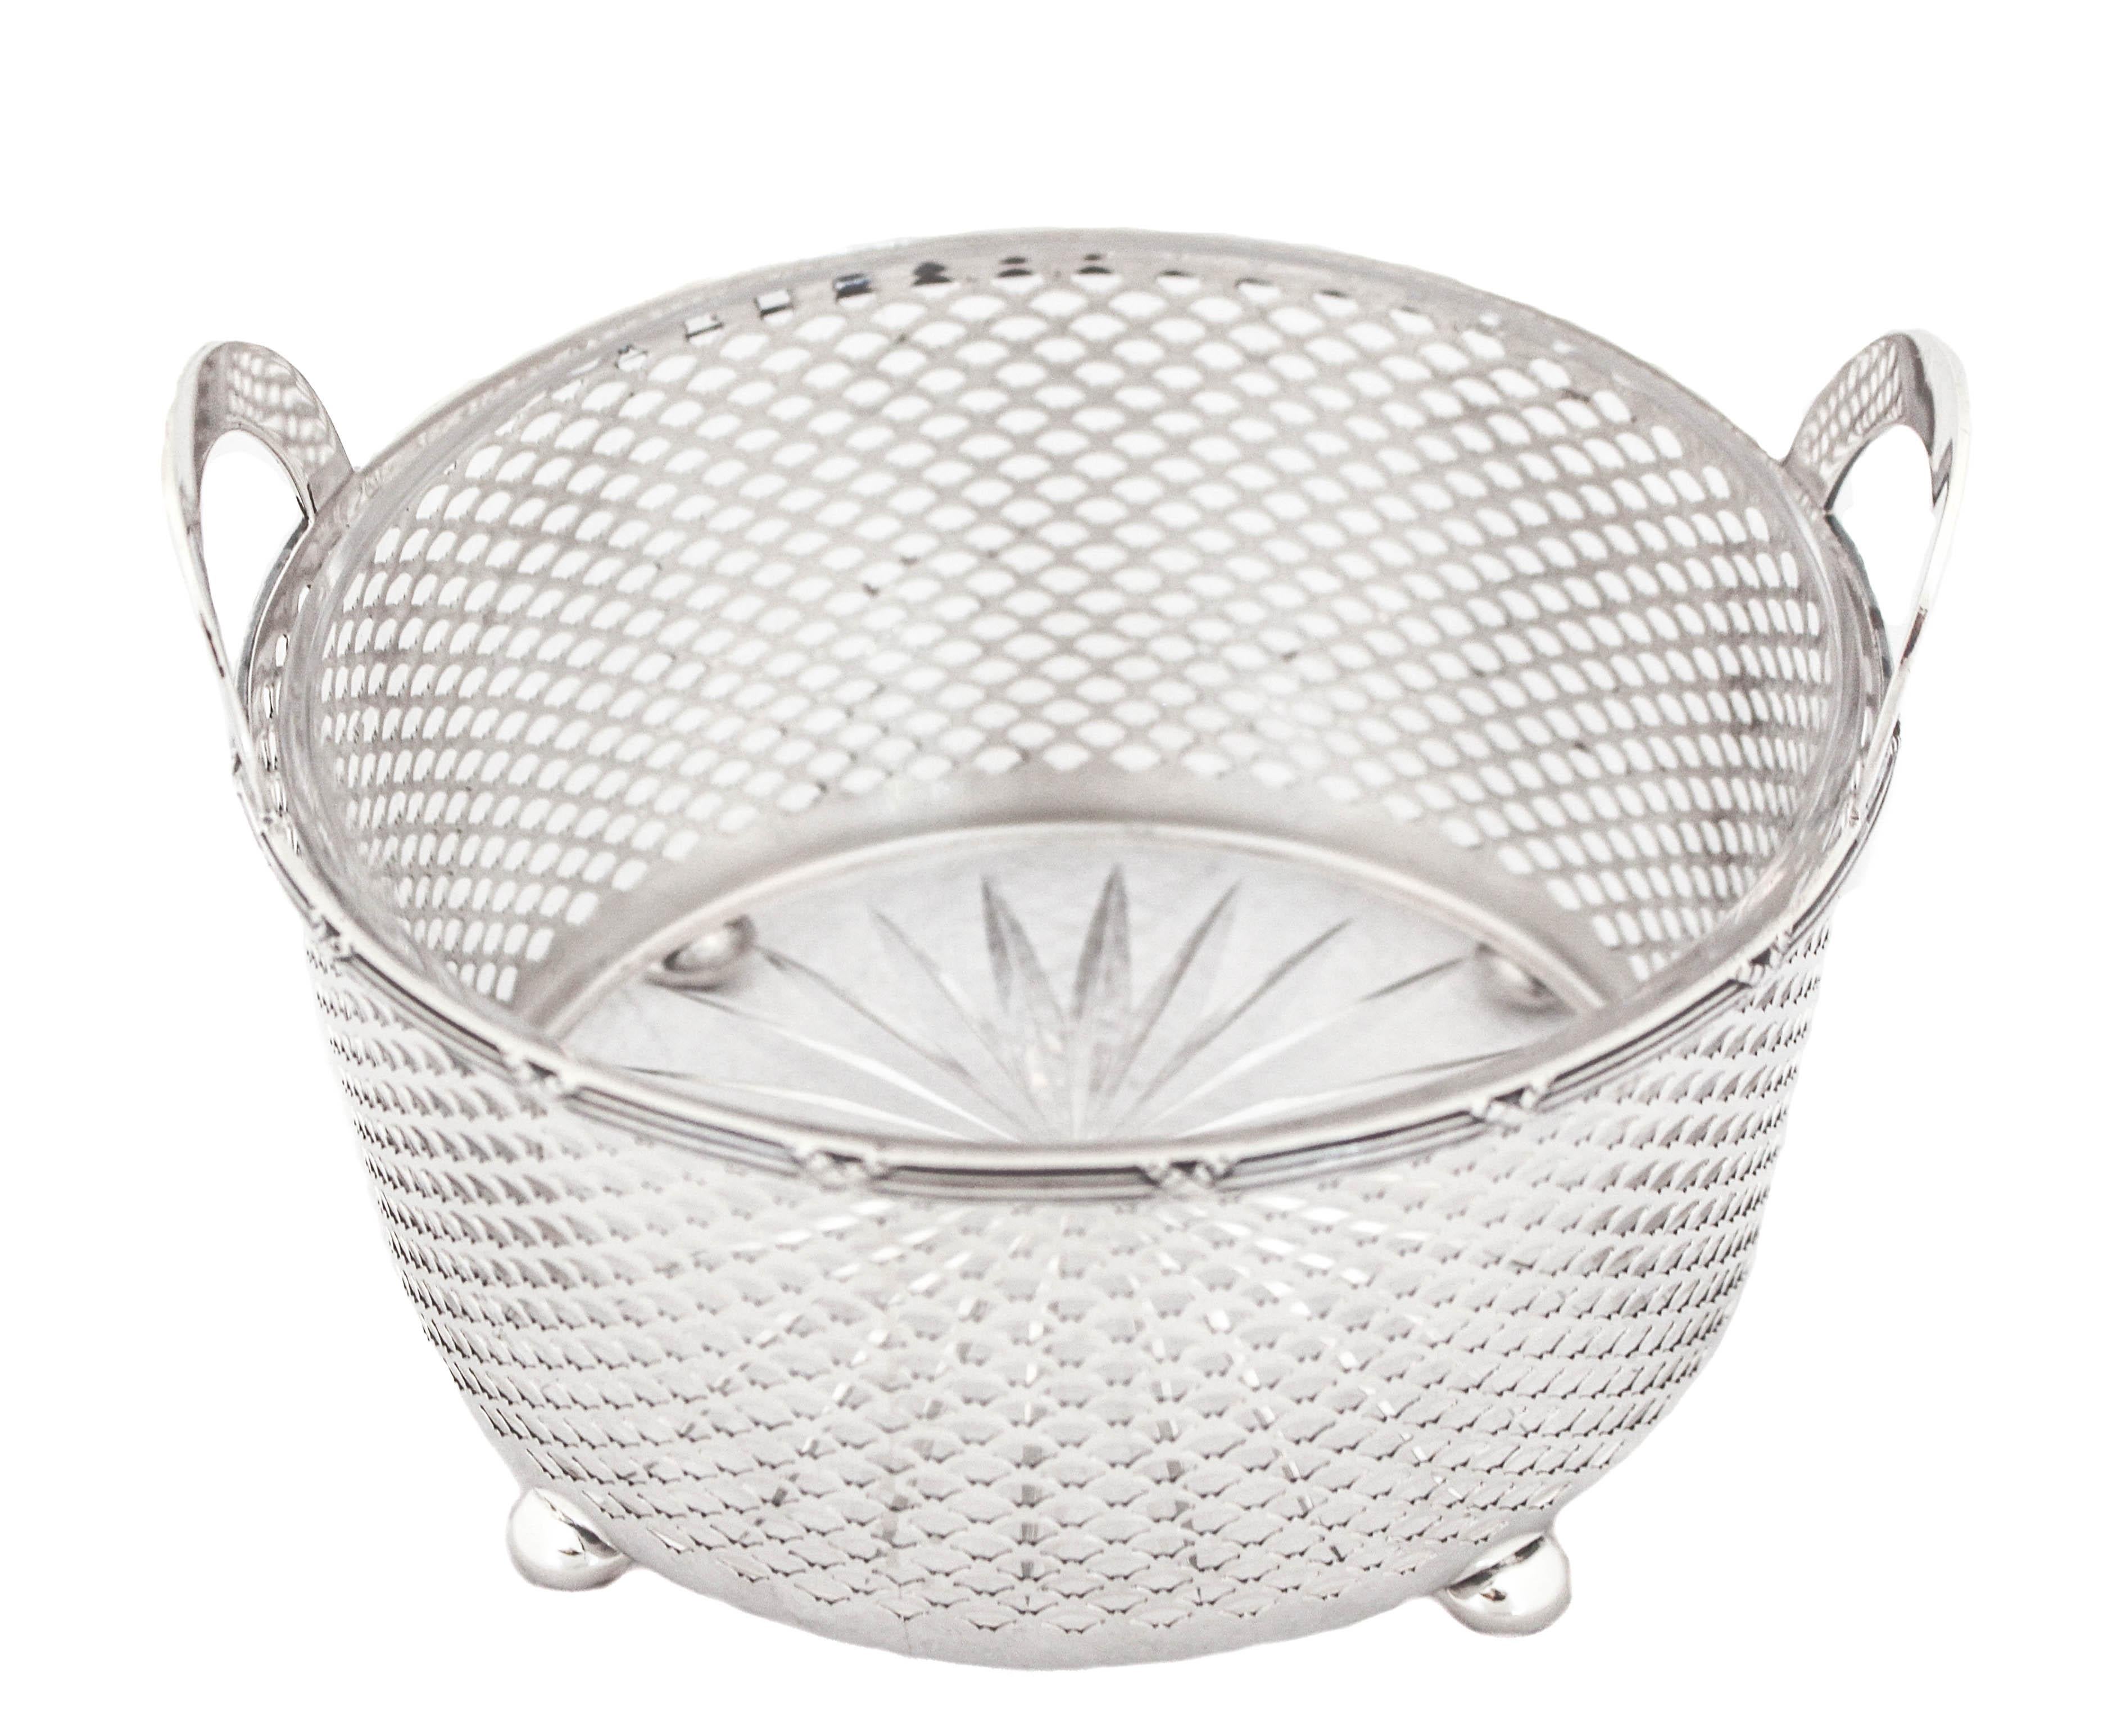 Being offered is a sterling silver Art Deco ice bucket by the Meriden Britannia Company. It stands on four balls and is raised off the surface.  It has arched cutout handles so it’s easy to carry and pass around.  The reticulated design around the